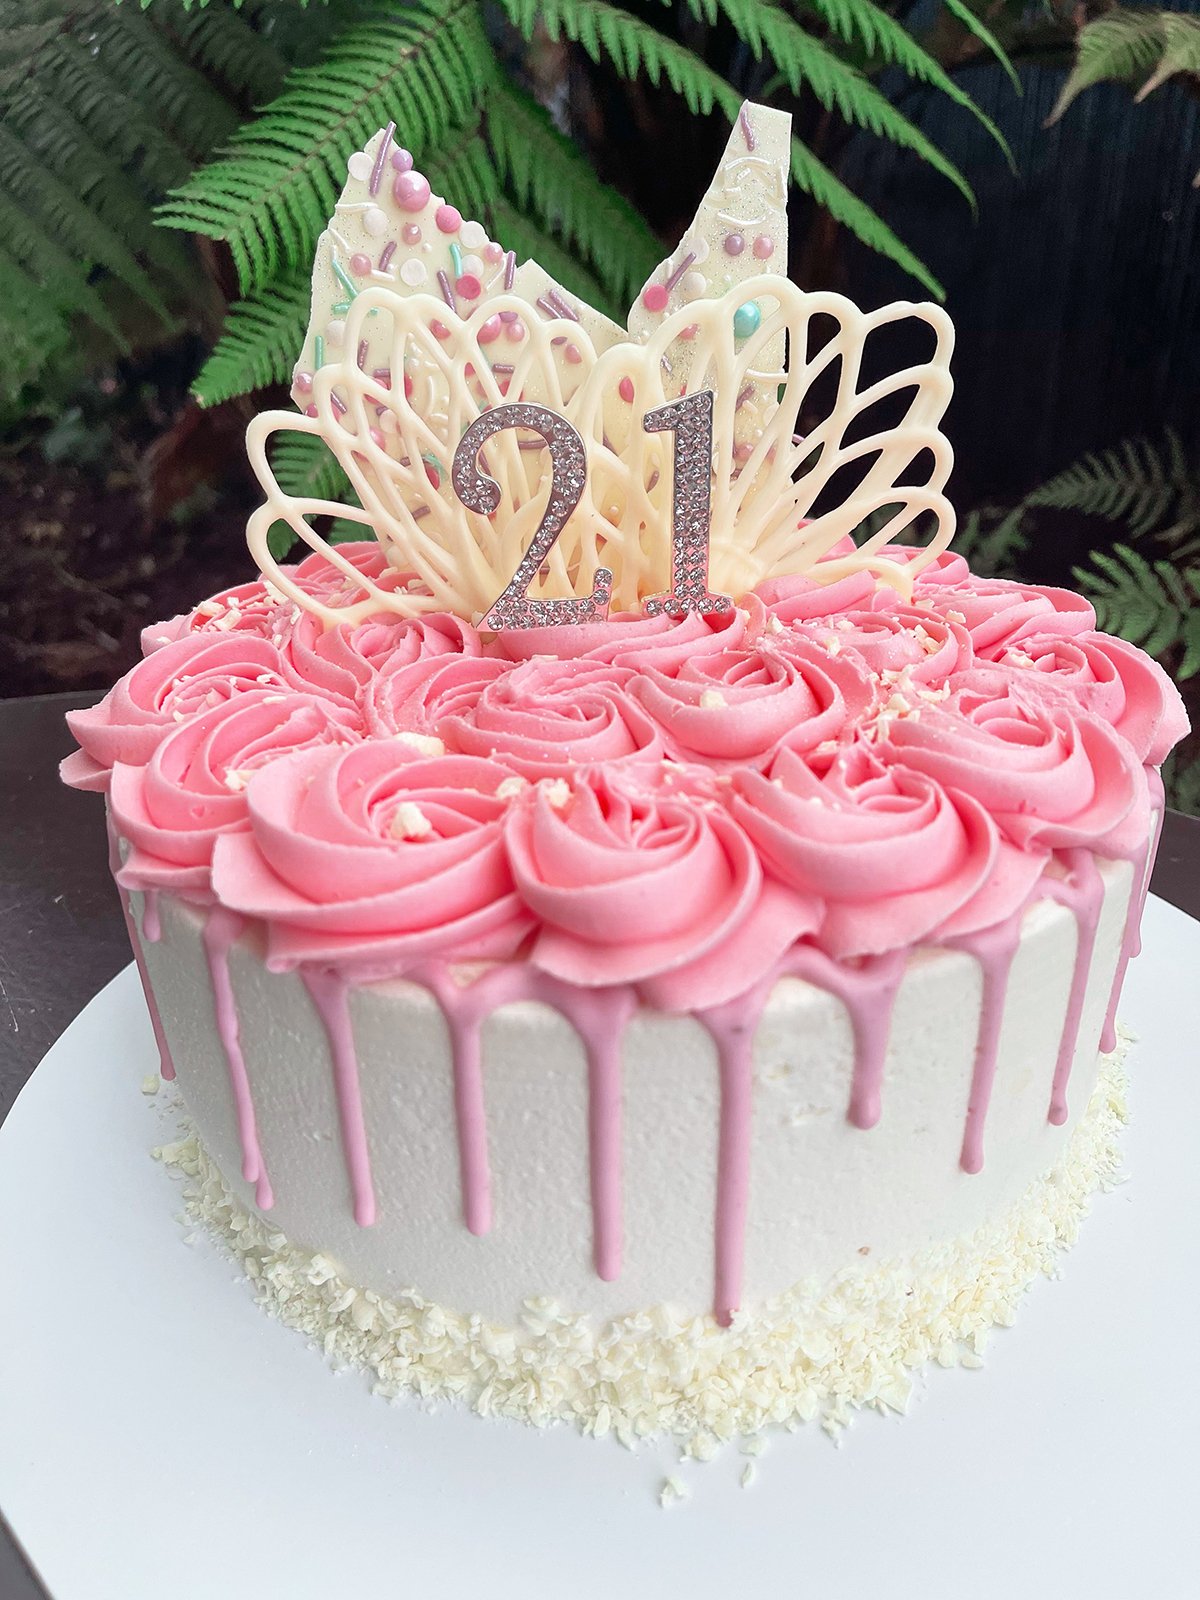 Pretty cake ideas for every celebration : pink and lavender cake